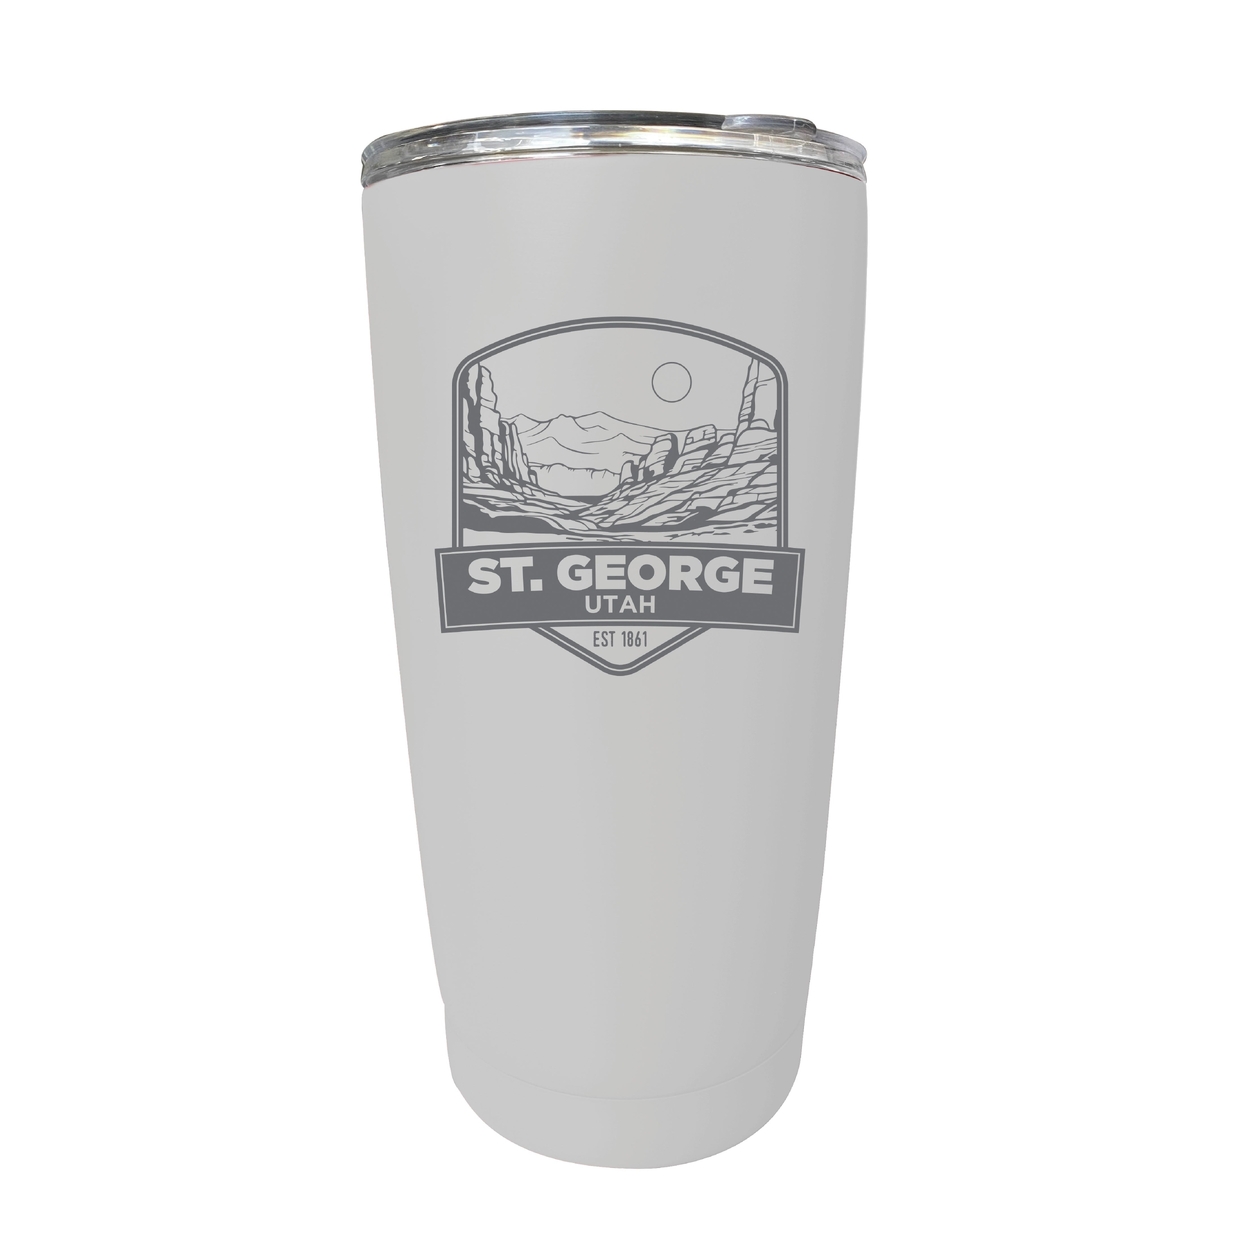 St. George Utah Souvenir 16 Oz Engraved Stainless Steel Insulated Tumbler - White,,2-Pack